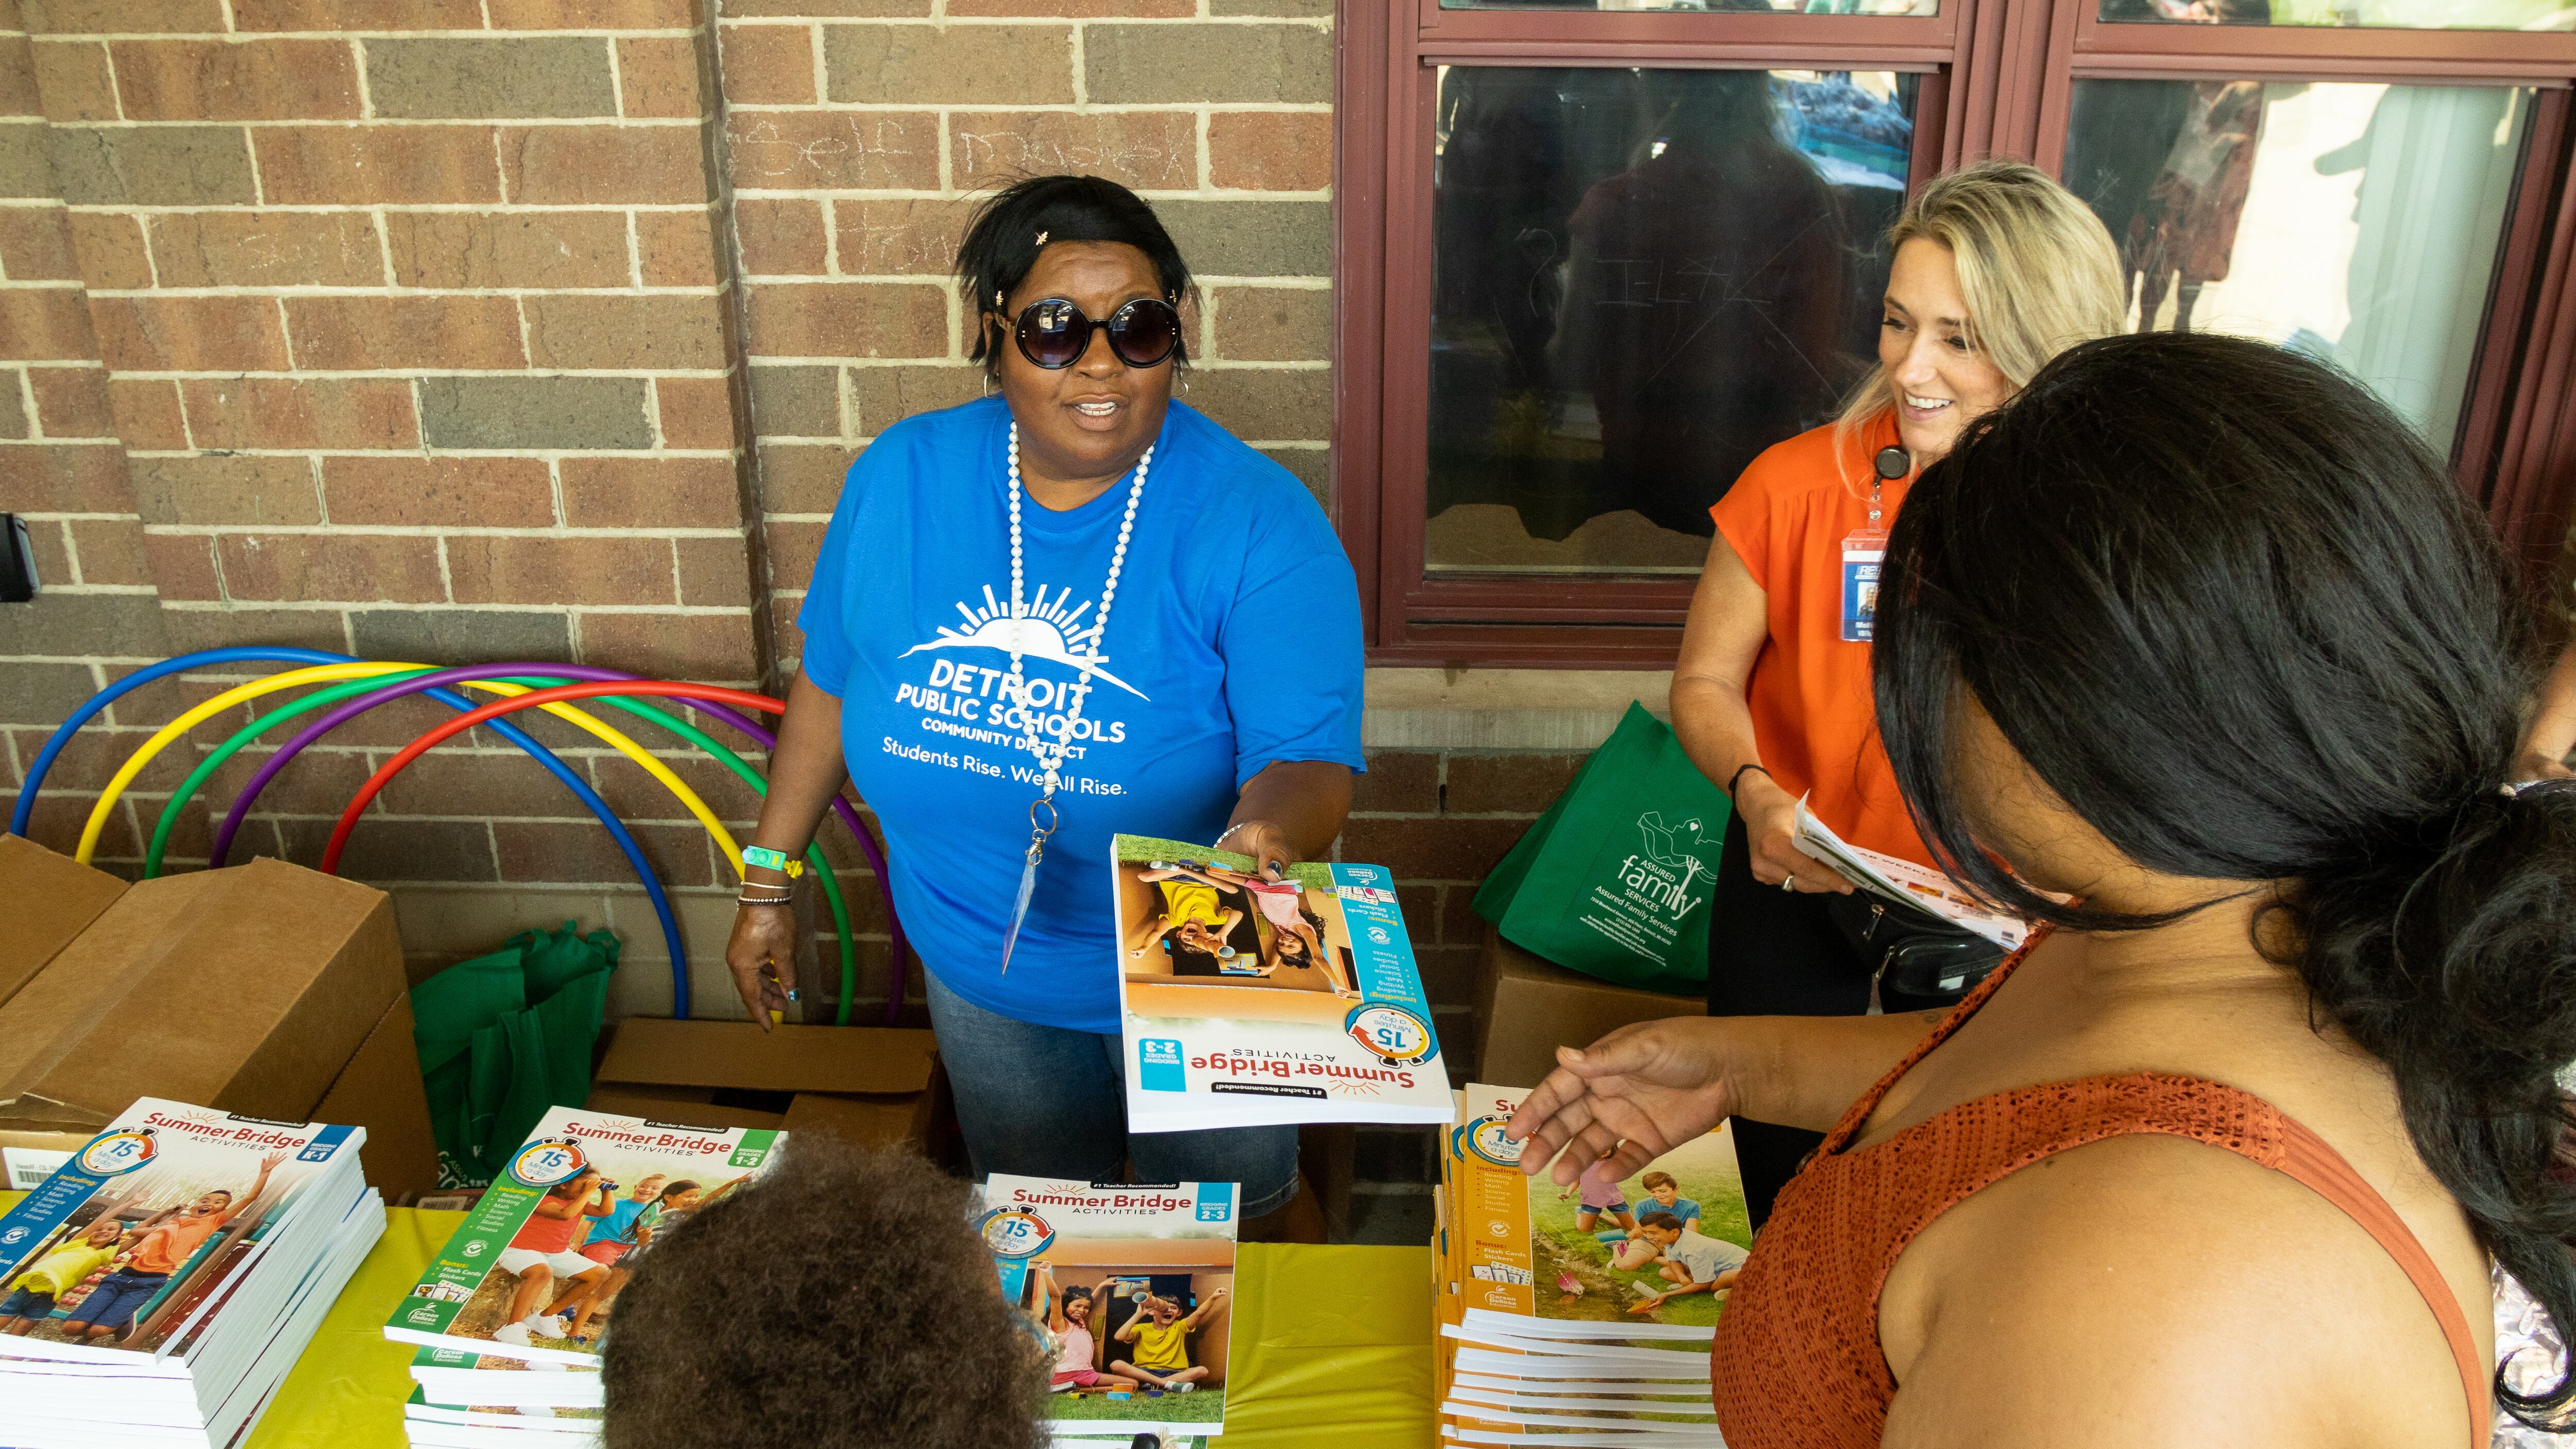 A woman standing behind a table hands curriculum materials to a parent who is accompanied by her child.